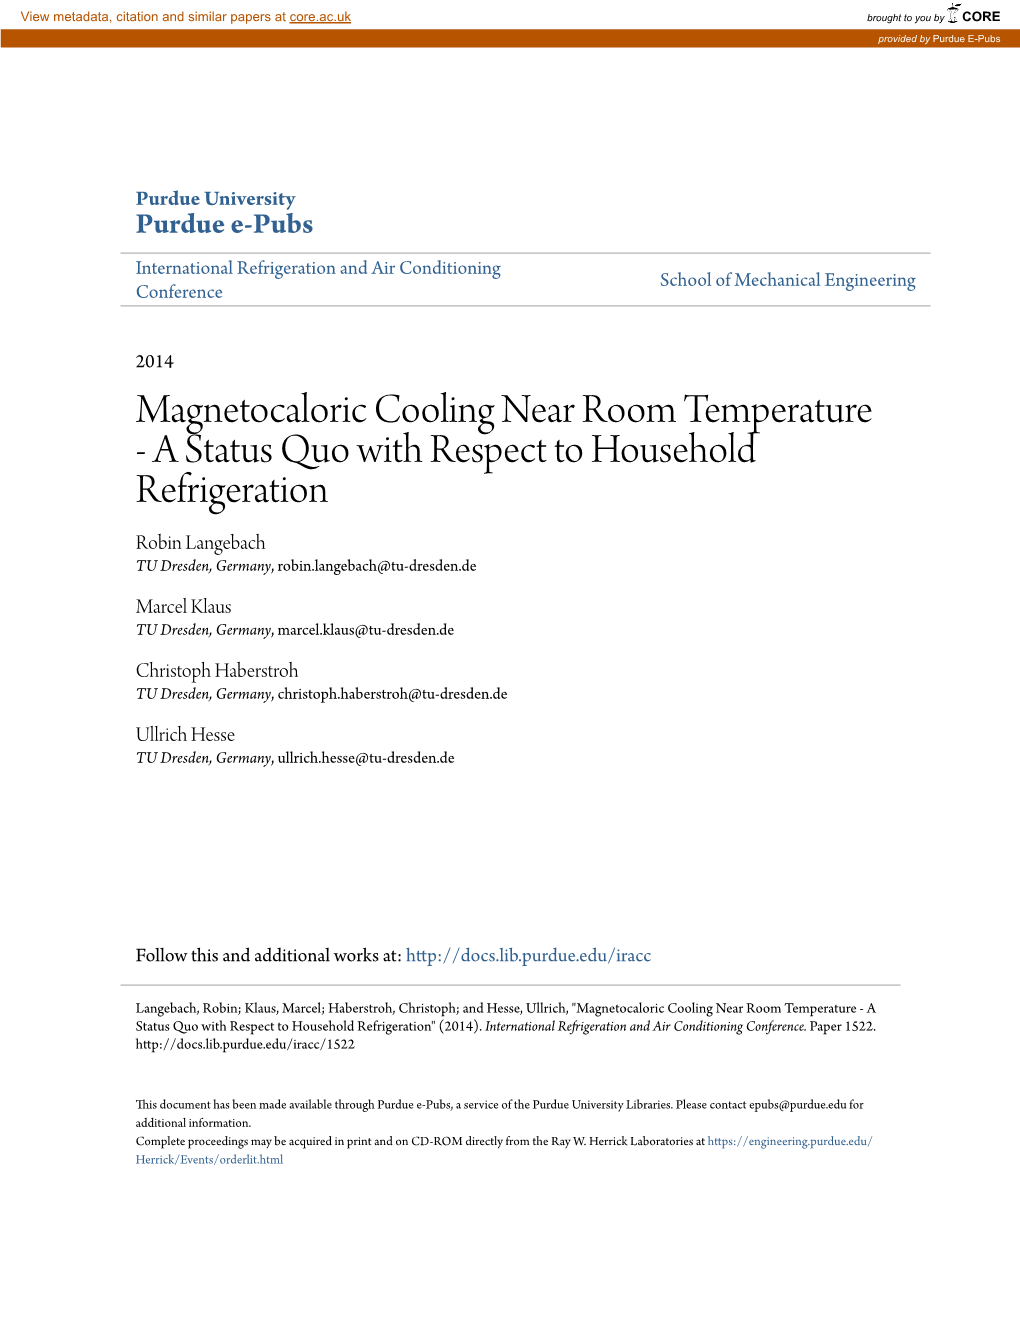 Magnetocaloric Cooling Near Room Temperature - a Status Quo with Respect to Household Refrigeration Robin Langebach TU Dresden, Germany, Robin.Langebach@Tu-Dresden.De